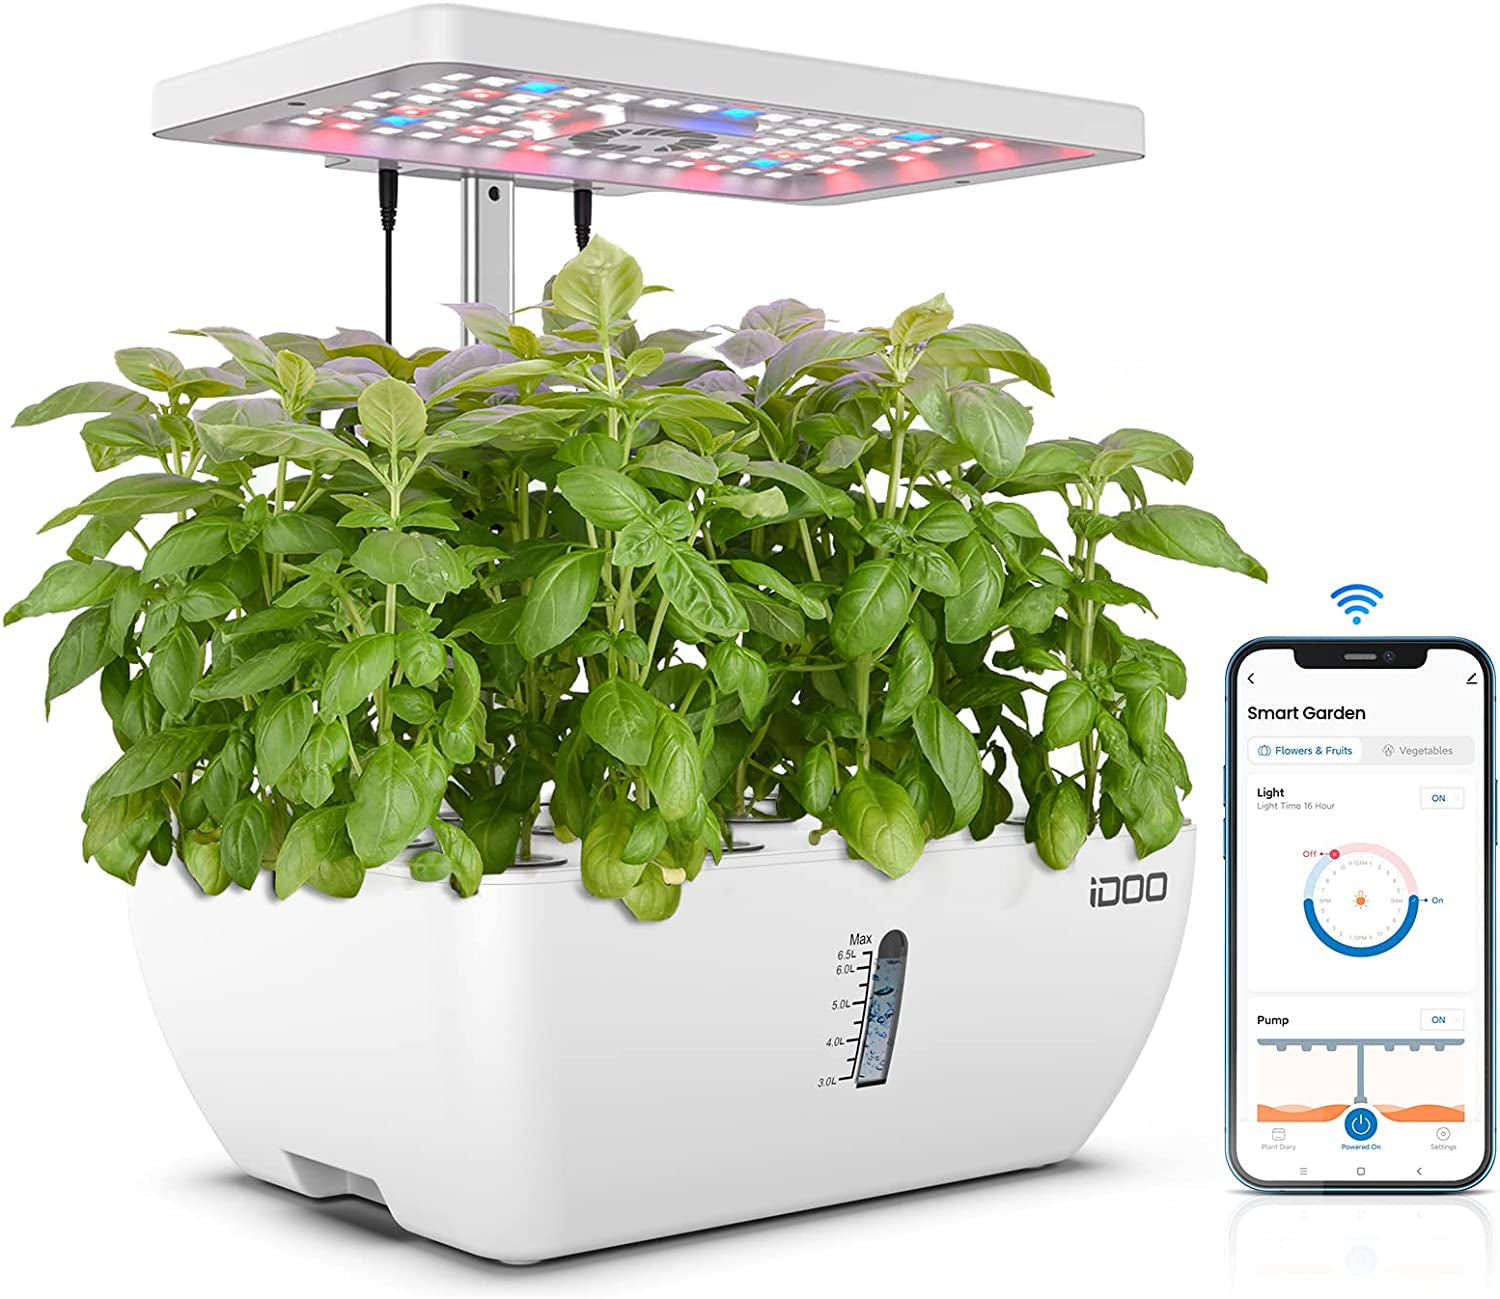 Wifi 12 Pods Hydroponic Growing System with 6.5L Water Tank, Smart Hydro Indoor Herb Garden up to 14.5", Plants Germination Kit with Pump System, Fan, Grow Light for Home Kitchen Gardening, White